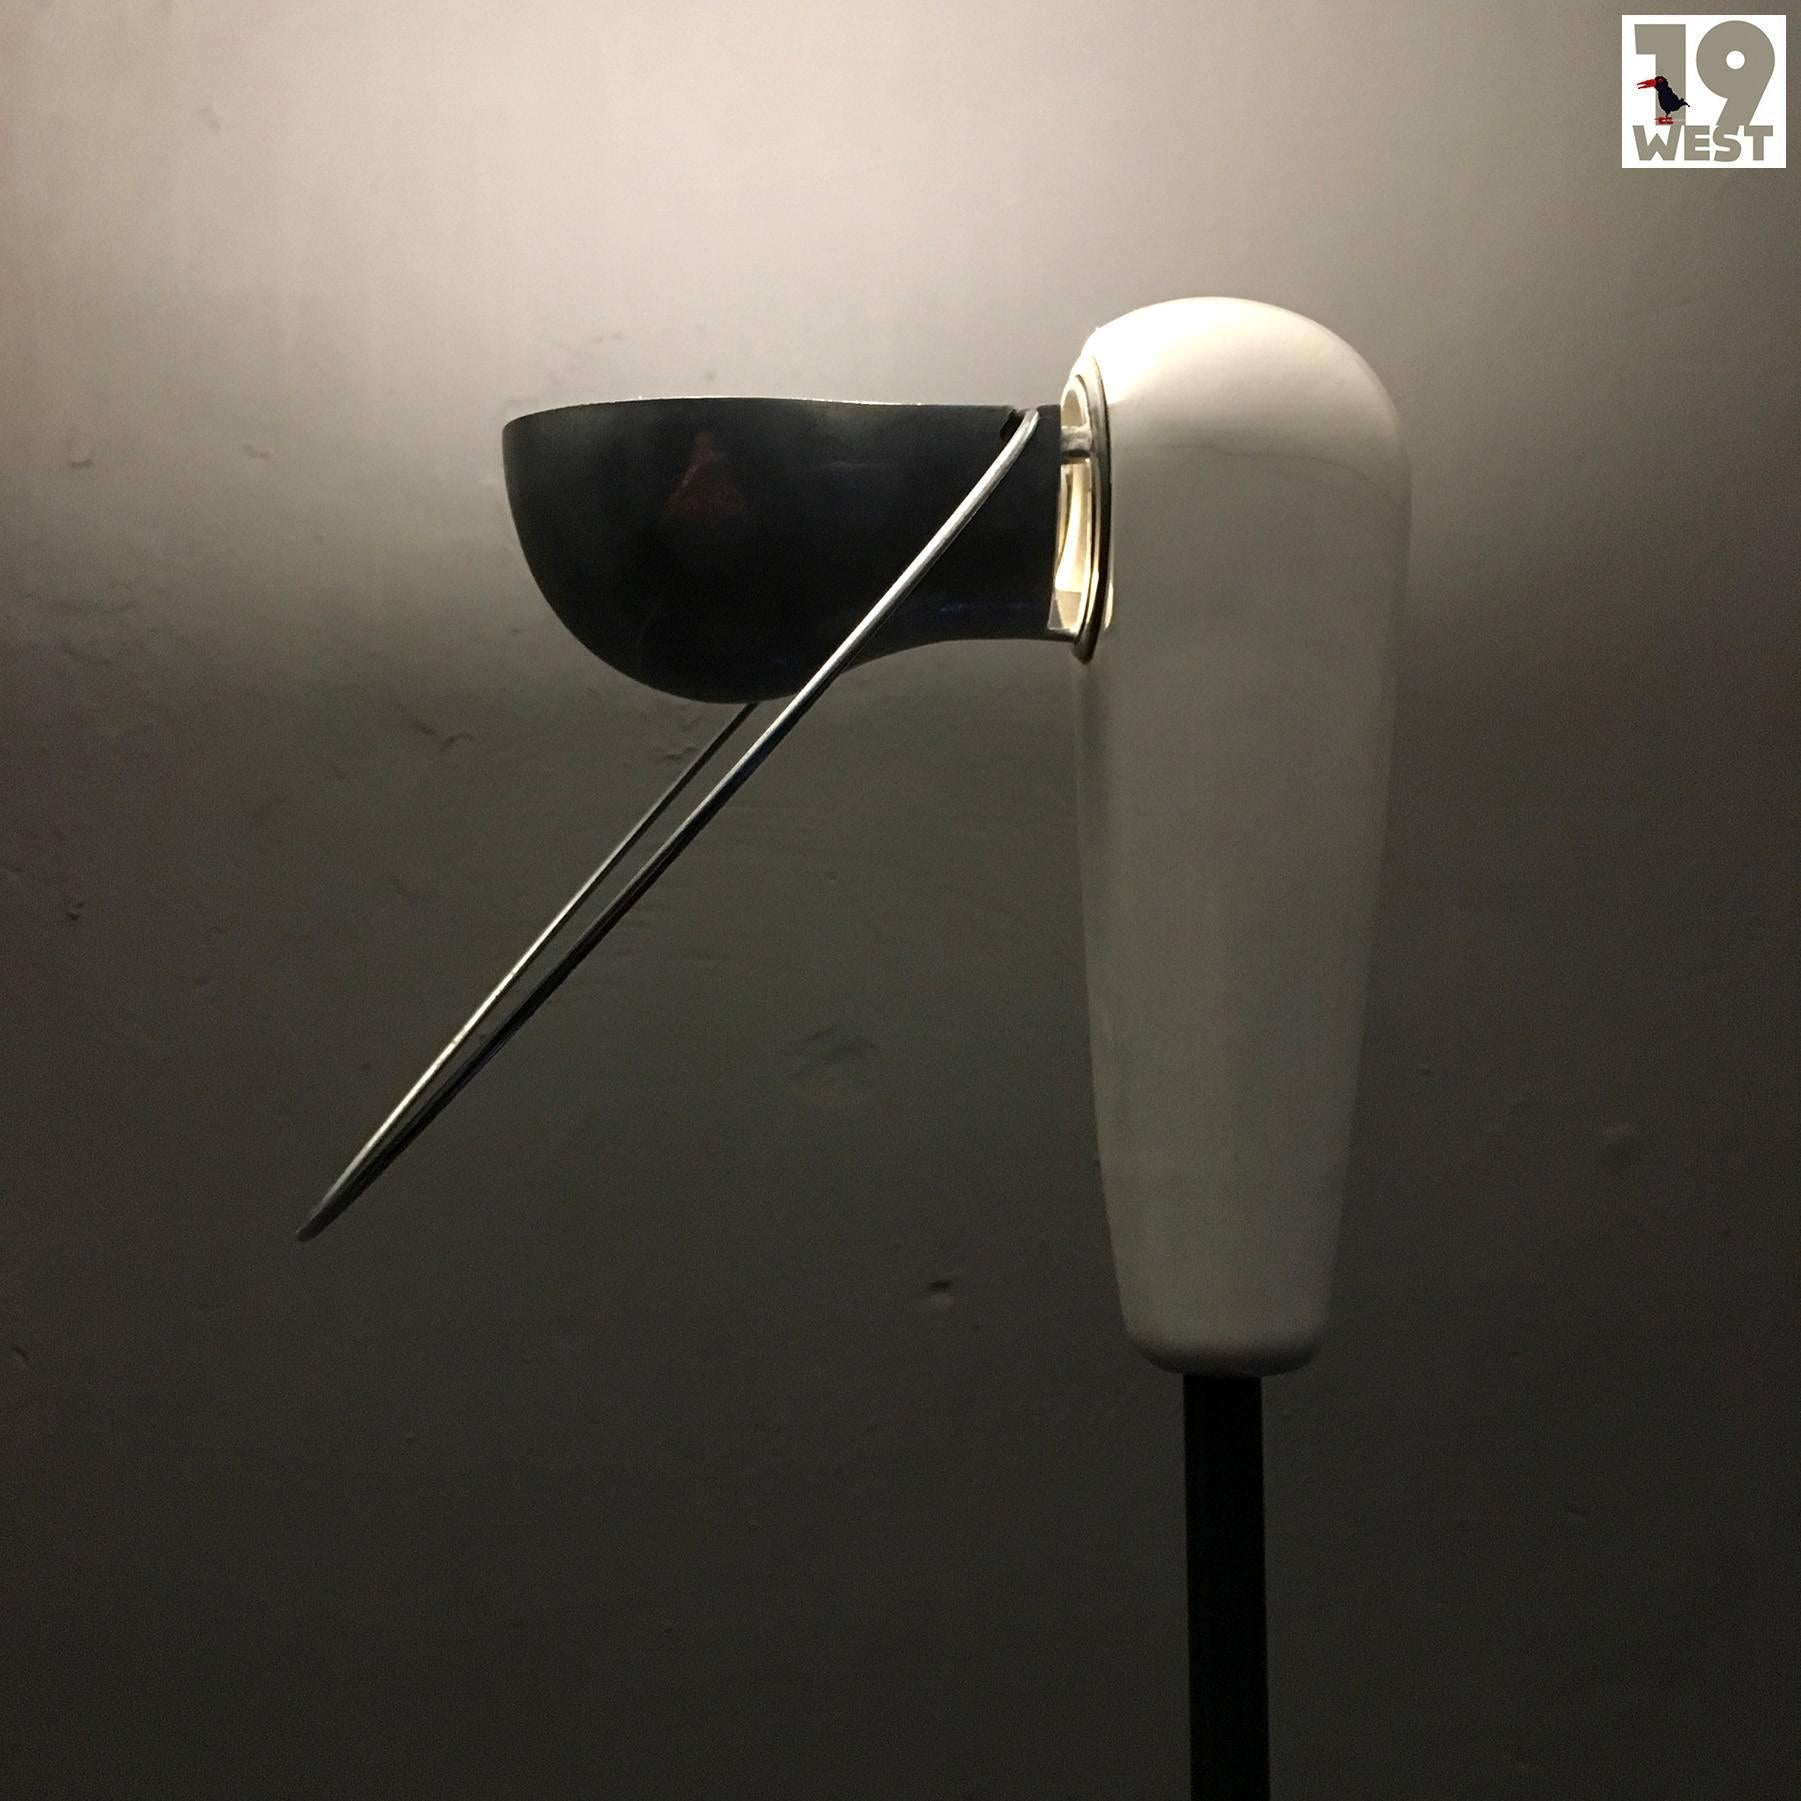 Bi-Bip floor lamp, designed in 1976 by Achille Castiglioni, manufactured in Italy by Flos. The piece stands out for its reduced design and beautiful materials. Base and head are made of white porcelain, the reflector of polished aluminium. It can be